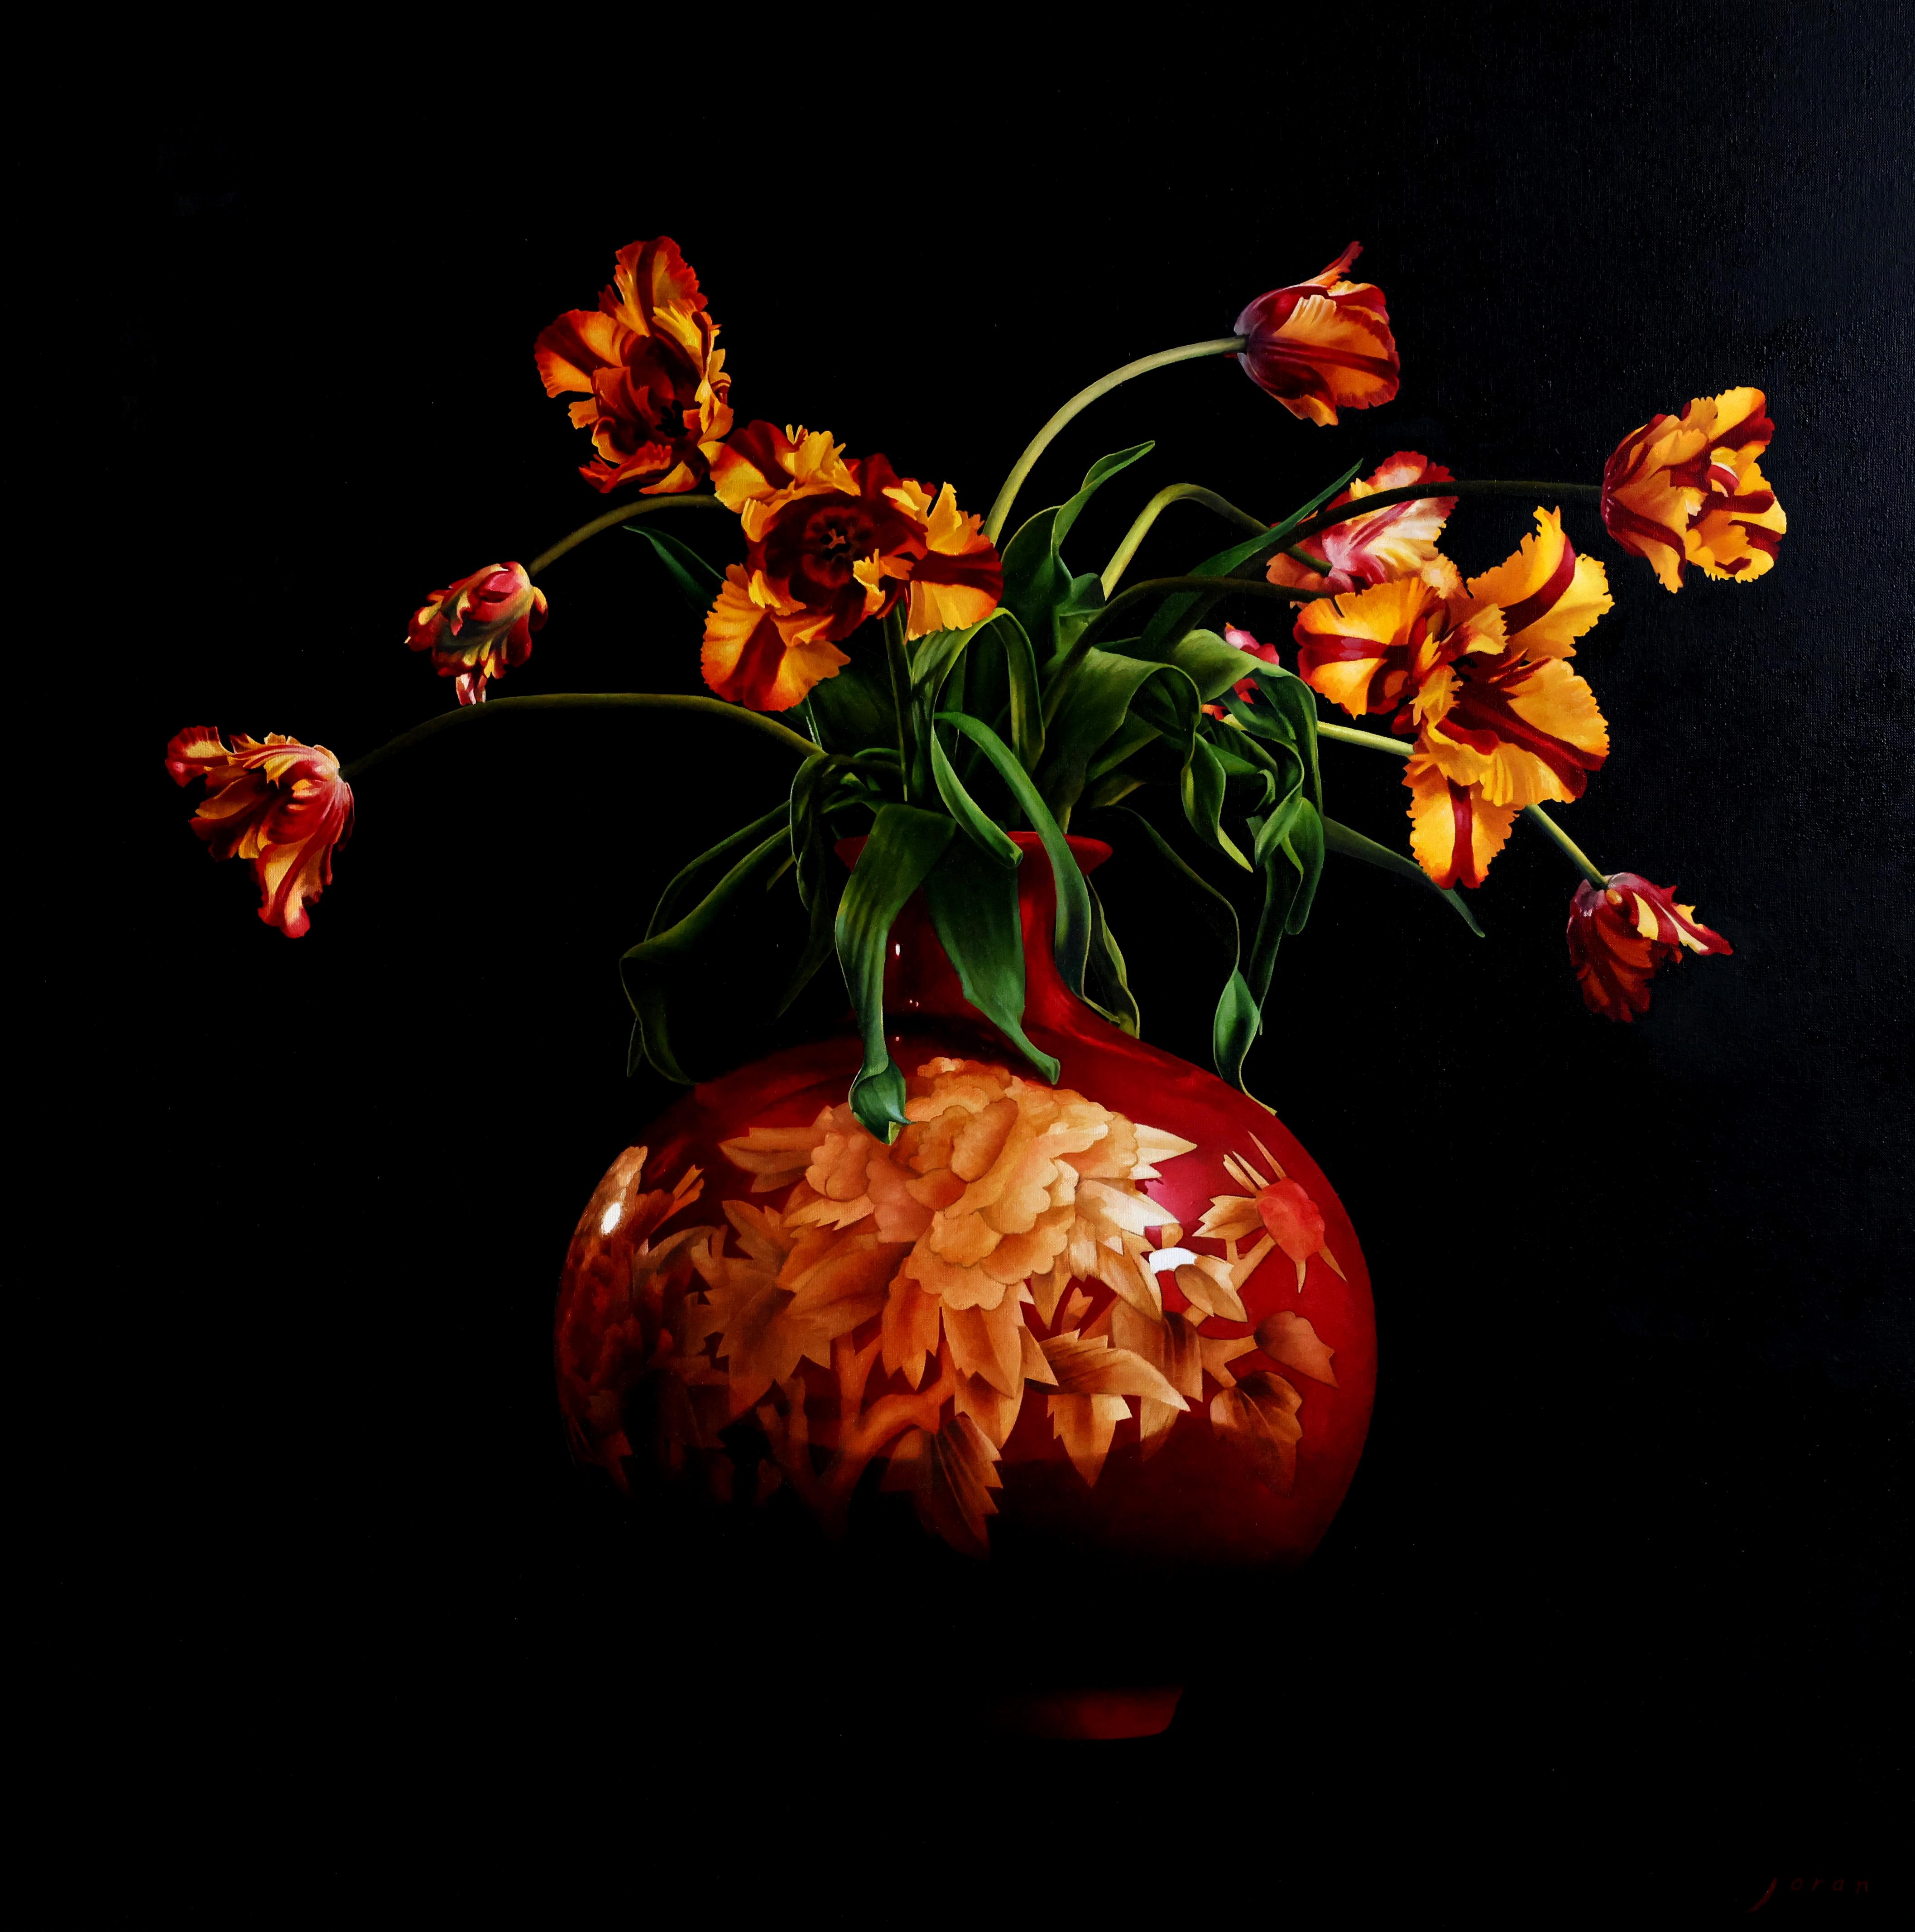 Tulips in red and yellow in Red Vase -21st Century Realistic Flower Painting 